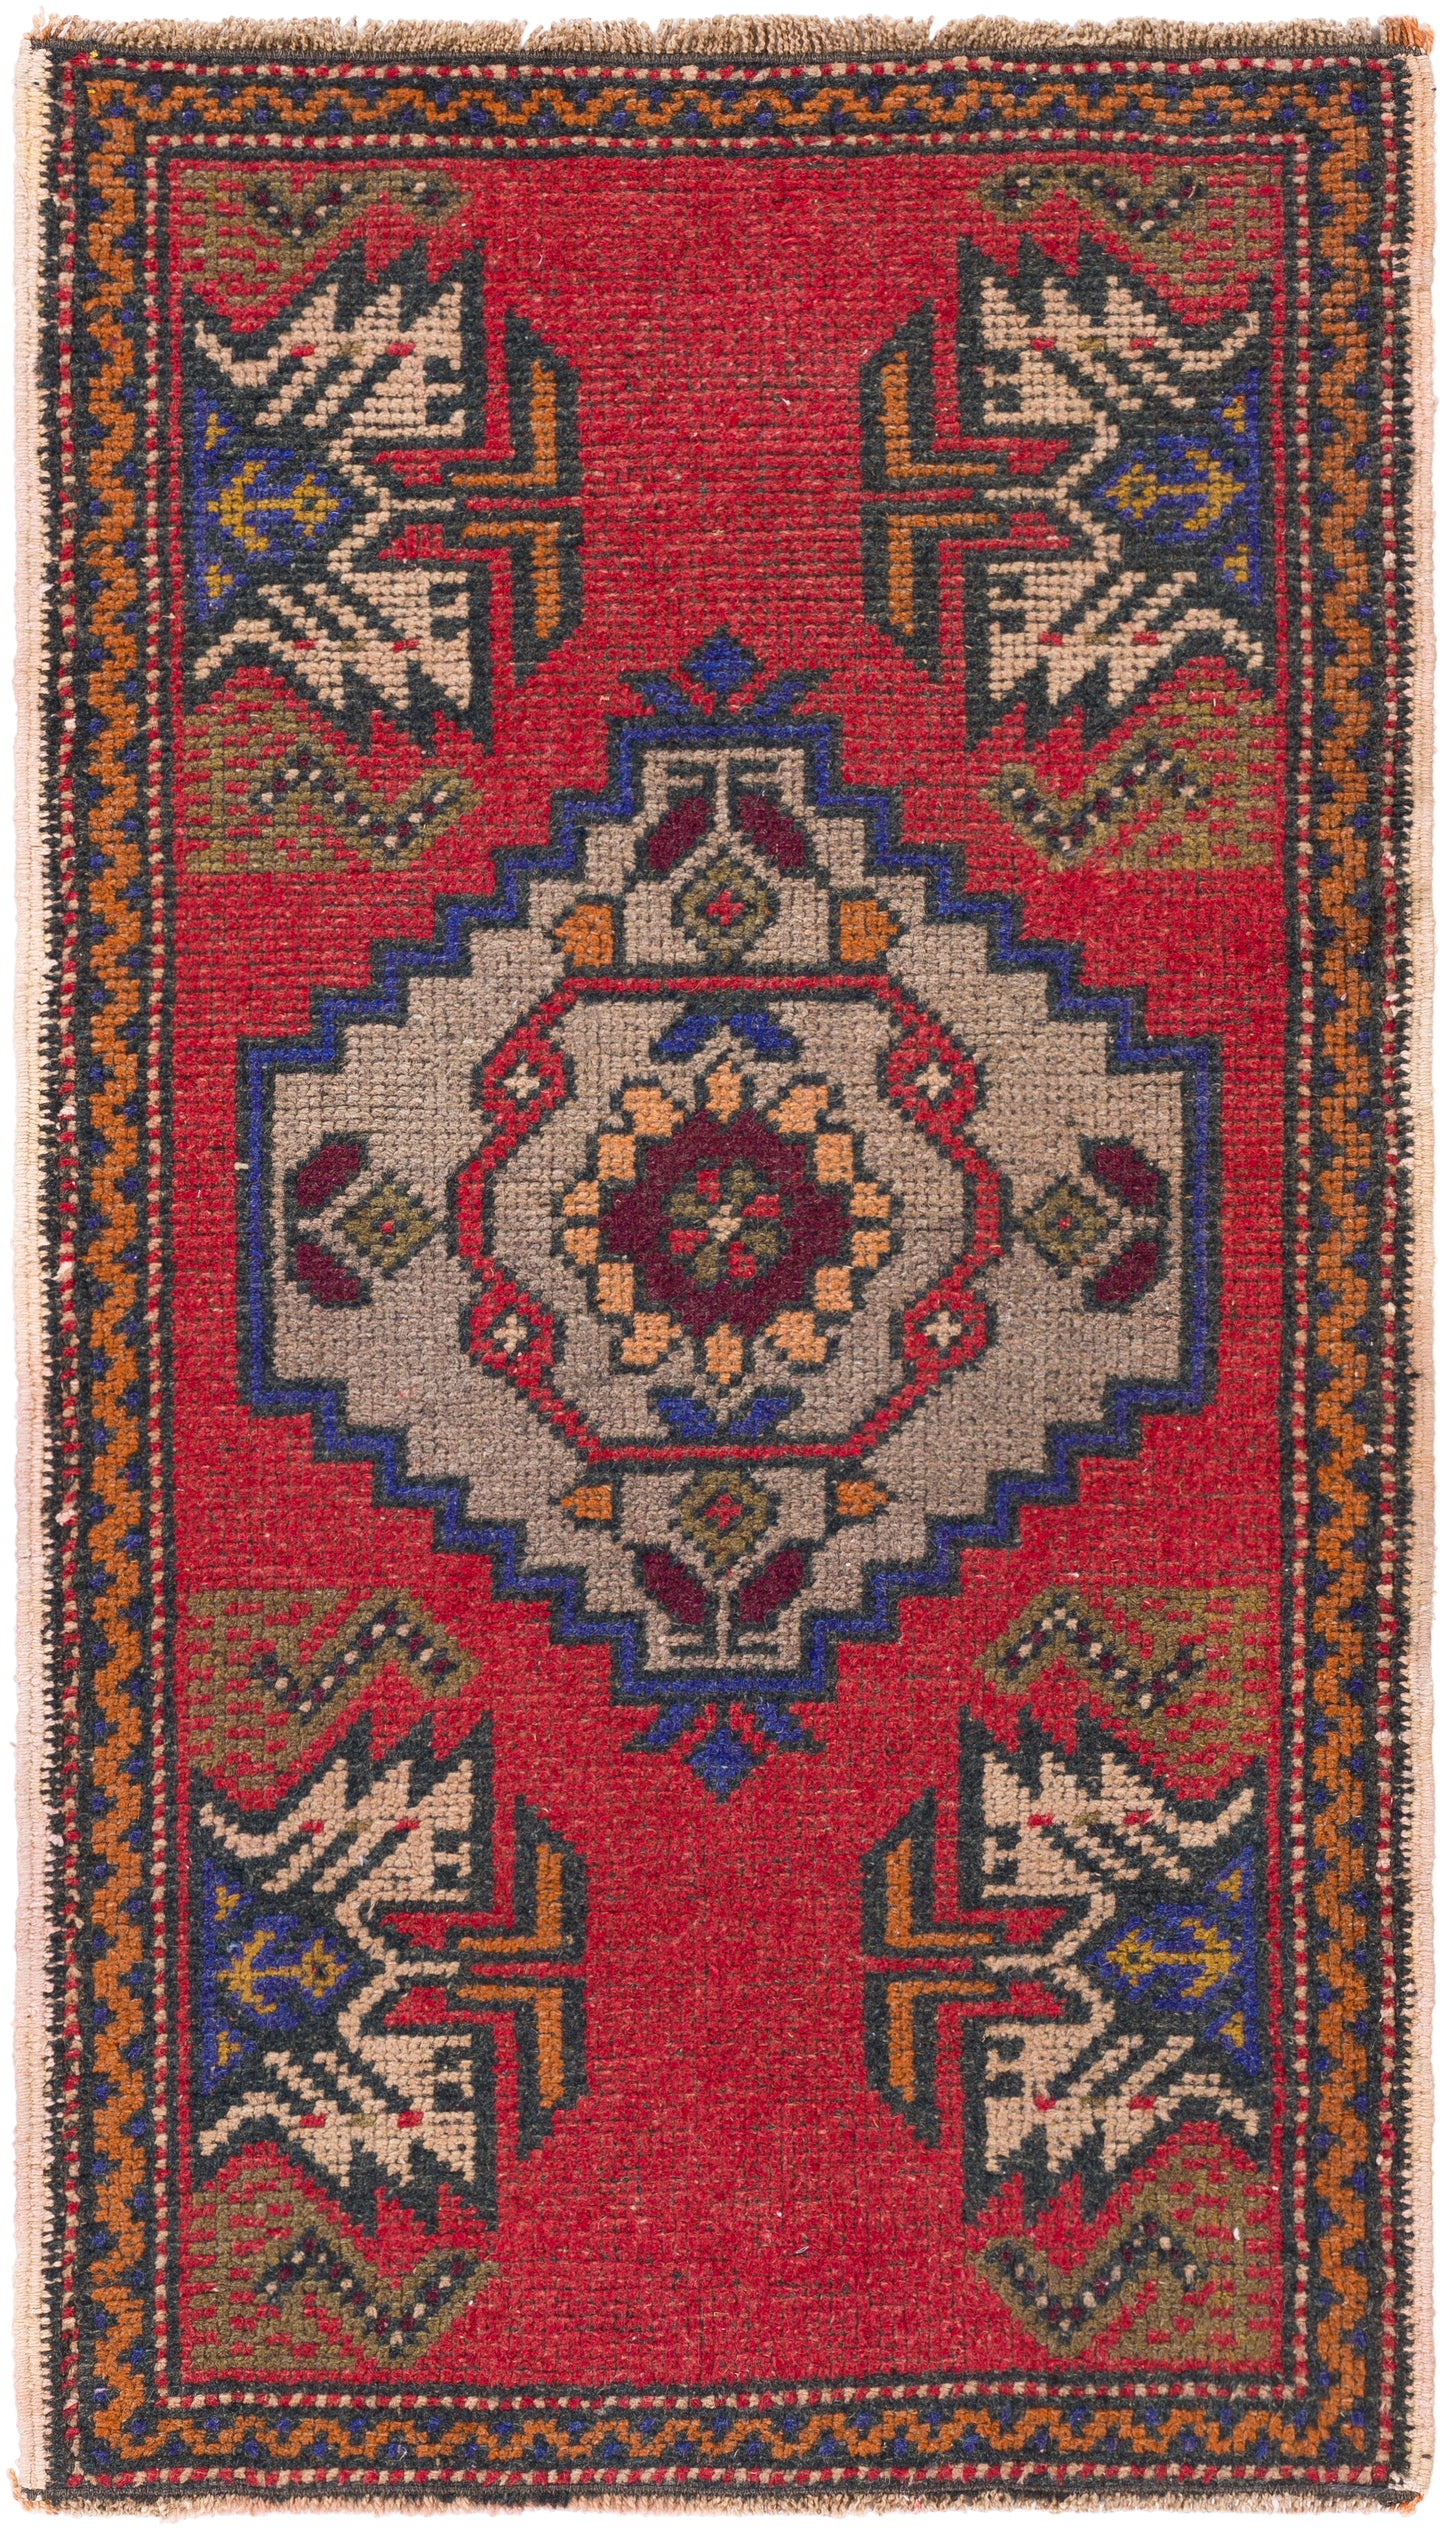 Antique One of a Kind 27479 Hand Knotted Wool Indoor Area Rug by Surya Rugs